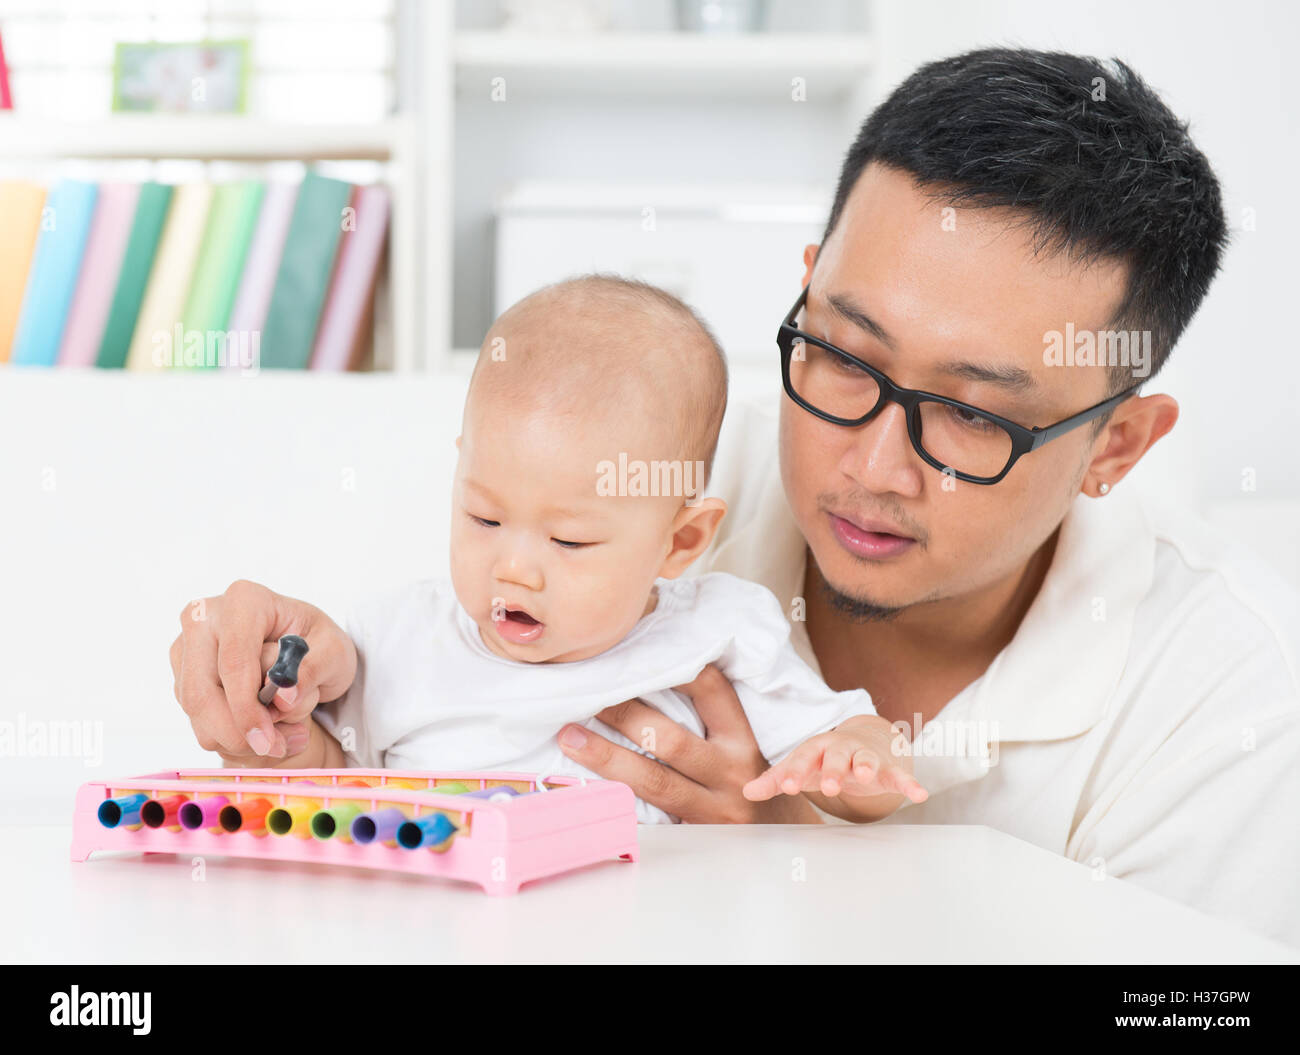 Father playing music instrument with baby. Stock Photo